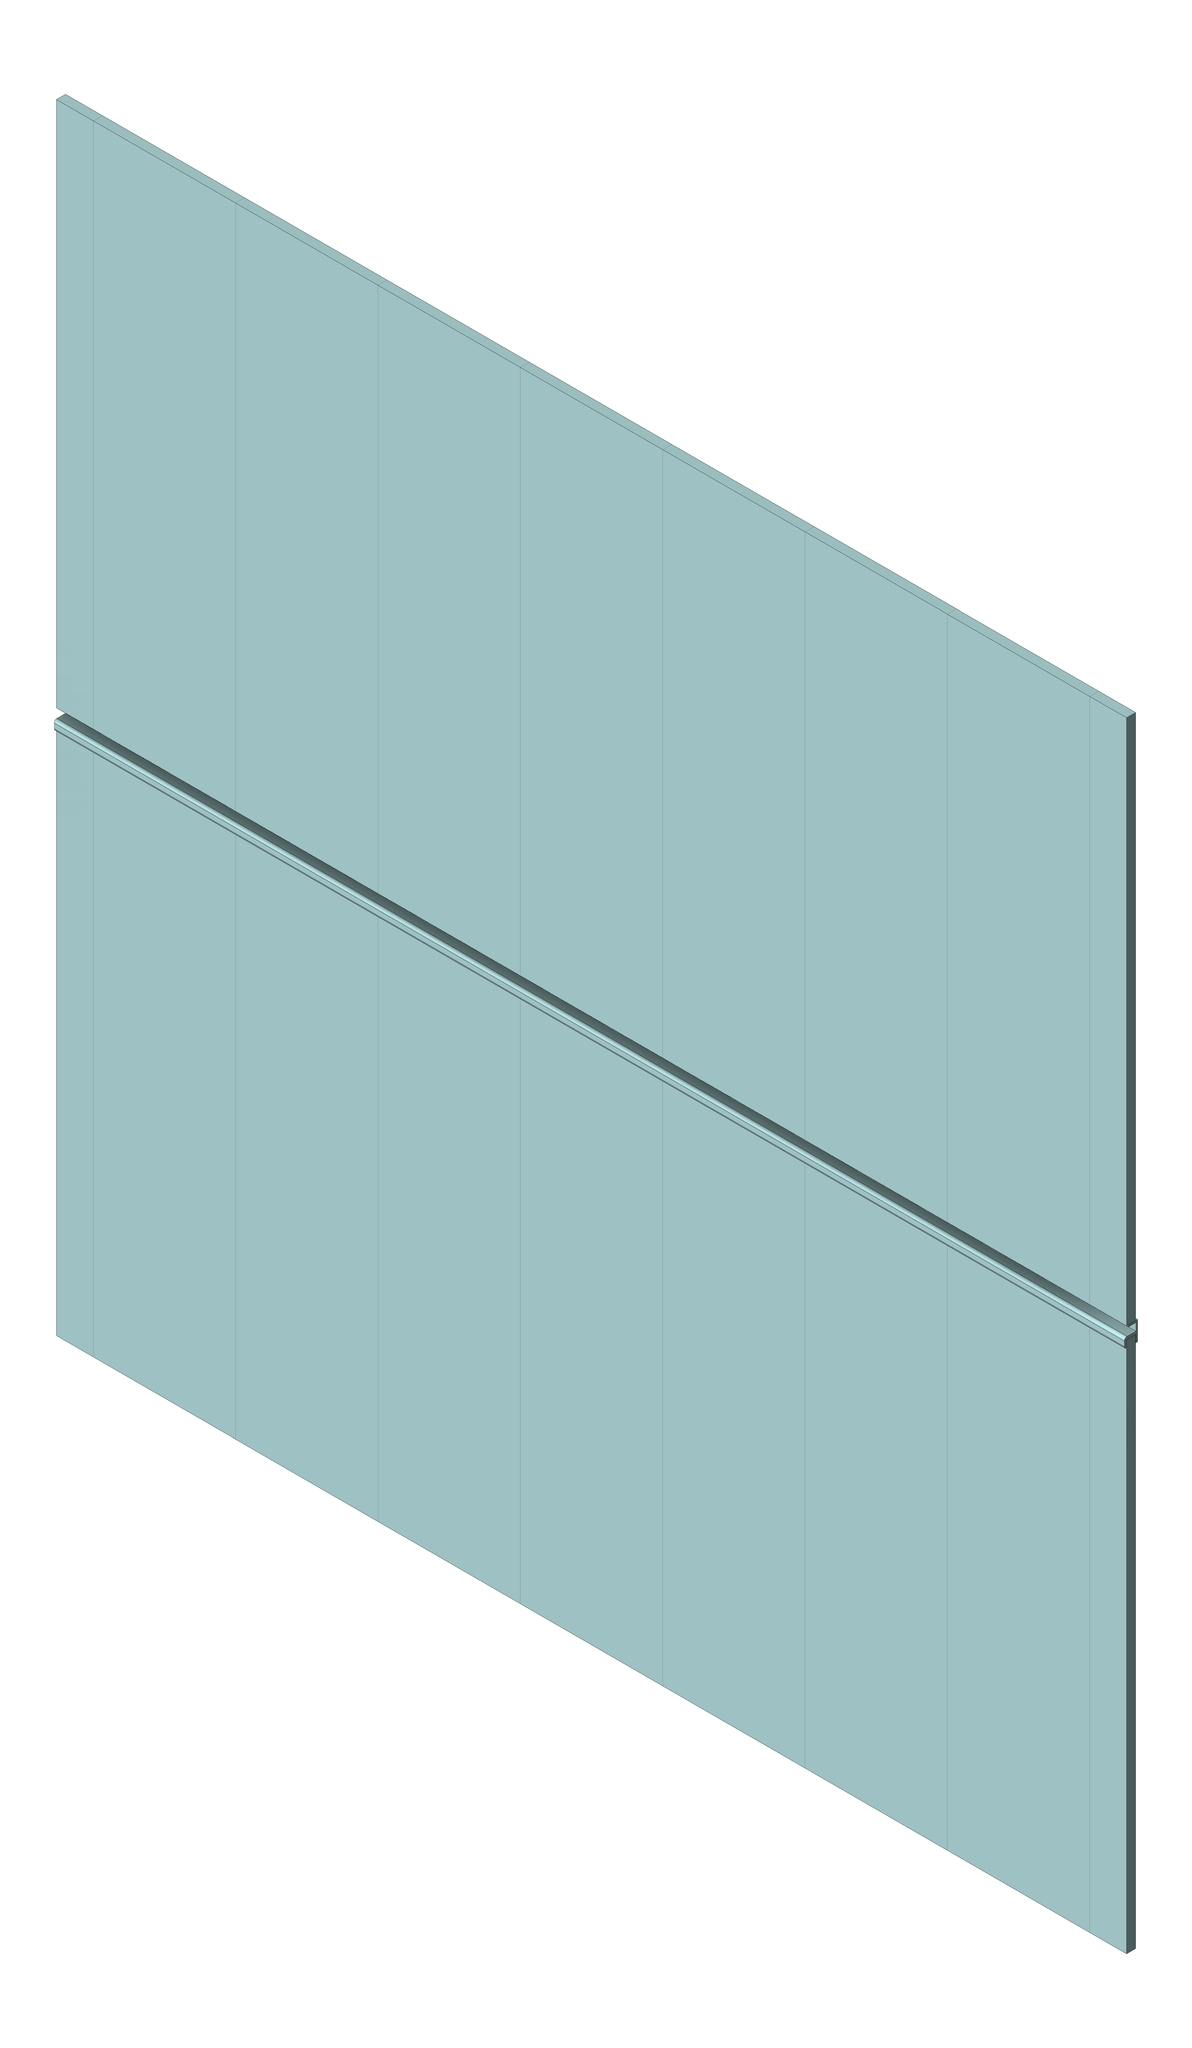 3D Shaded Image of Cladding Grooved JamesHardie AxonCladding